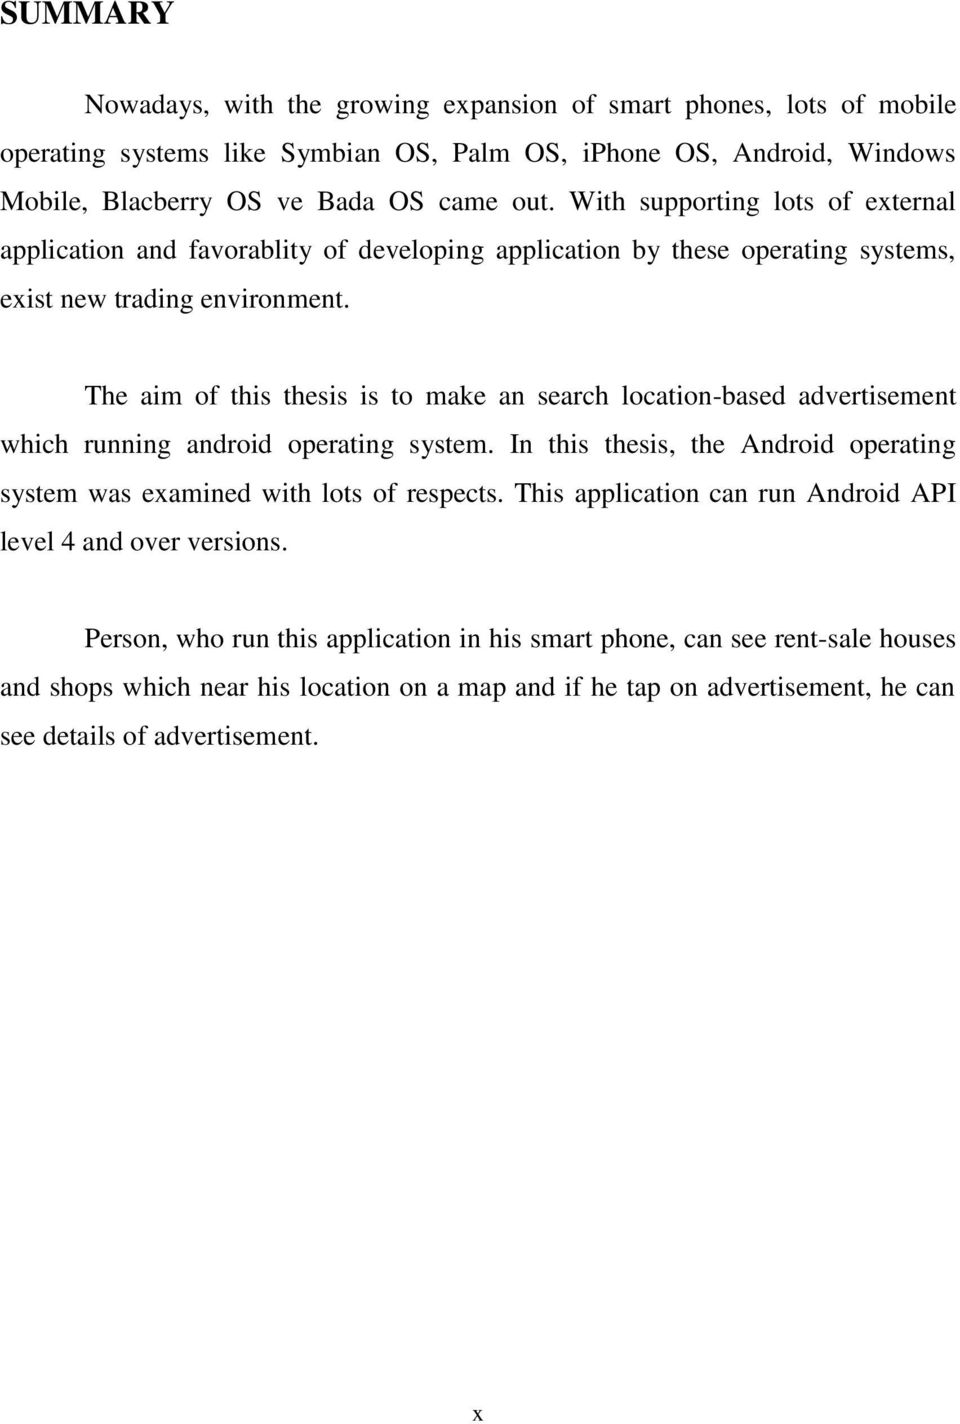 The aim of this thesis is to make an search location-based advertisement which running android operating system. In this thesis, the Android operating system was examined with lots of respects.